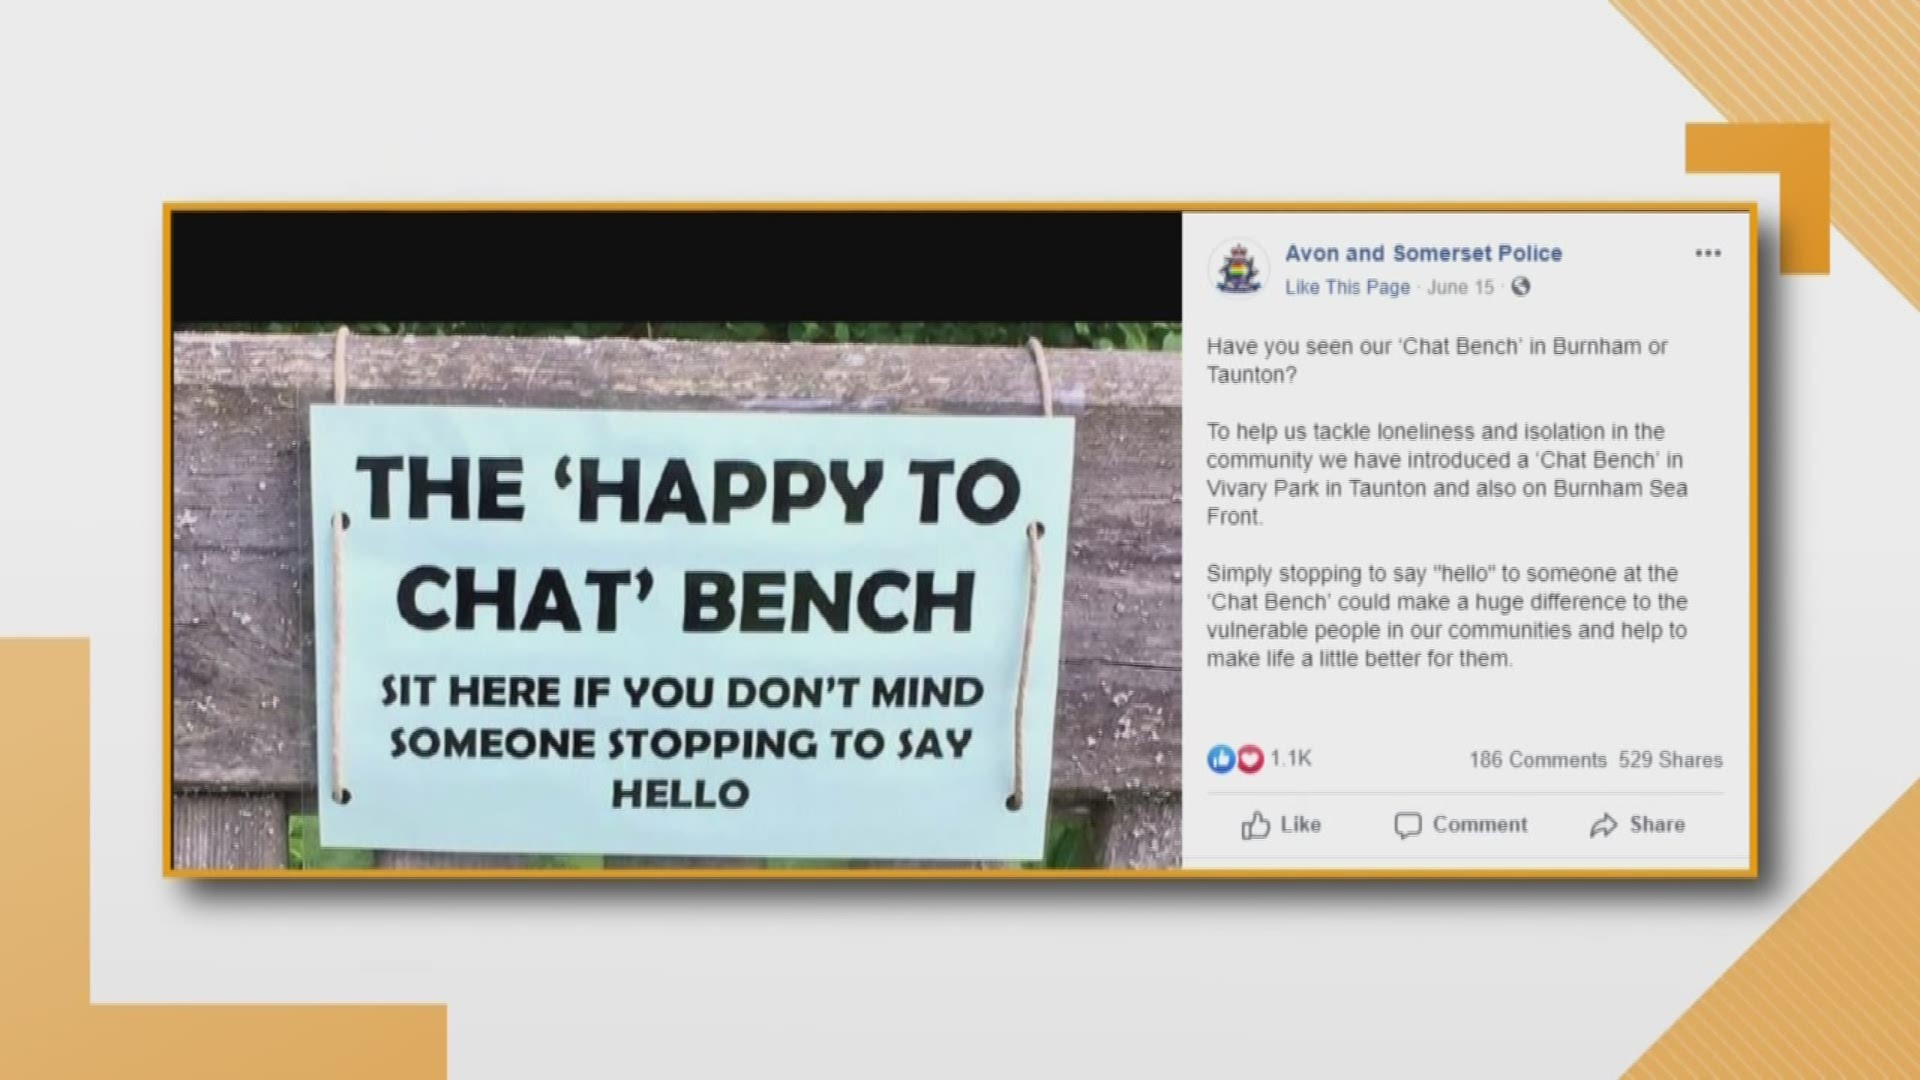 What are you wearing to work today? If you are going for a more casual look -- you aren't the only one! Plus, two English towns have installed "chat benches" in two local parks. And it's World Emoji Day-- Apple is celebrating by unveiling new emojis!